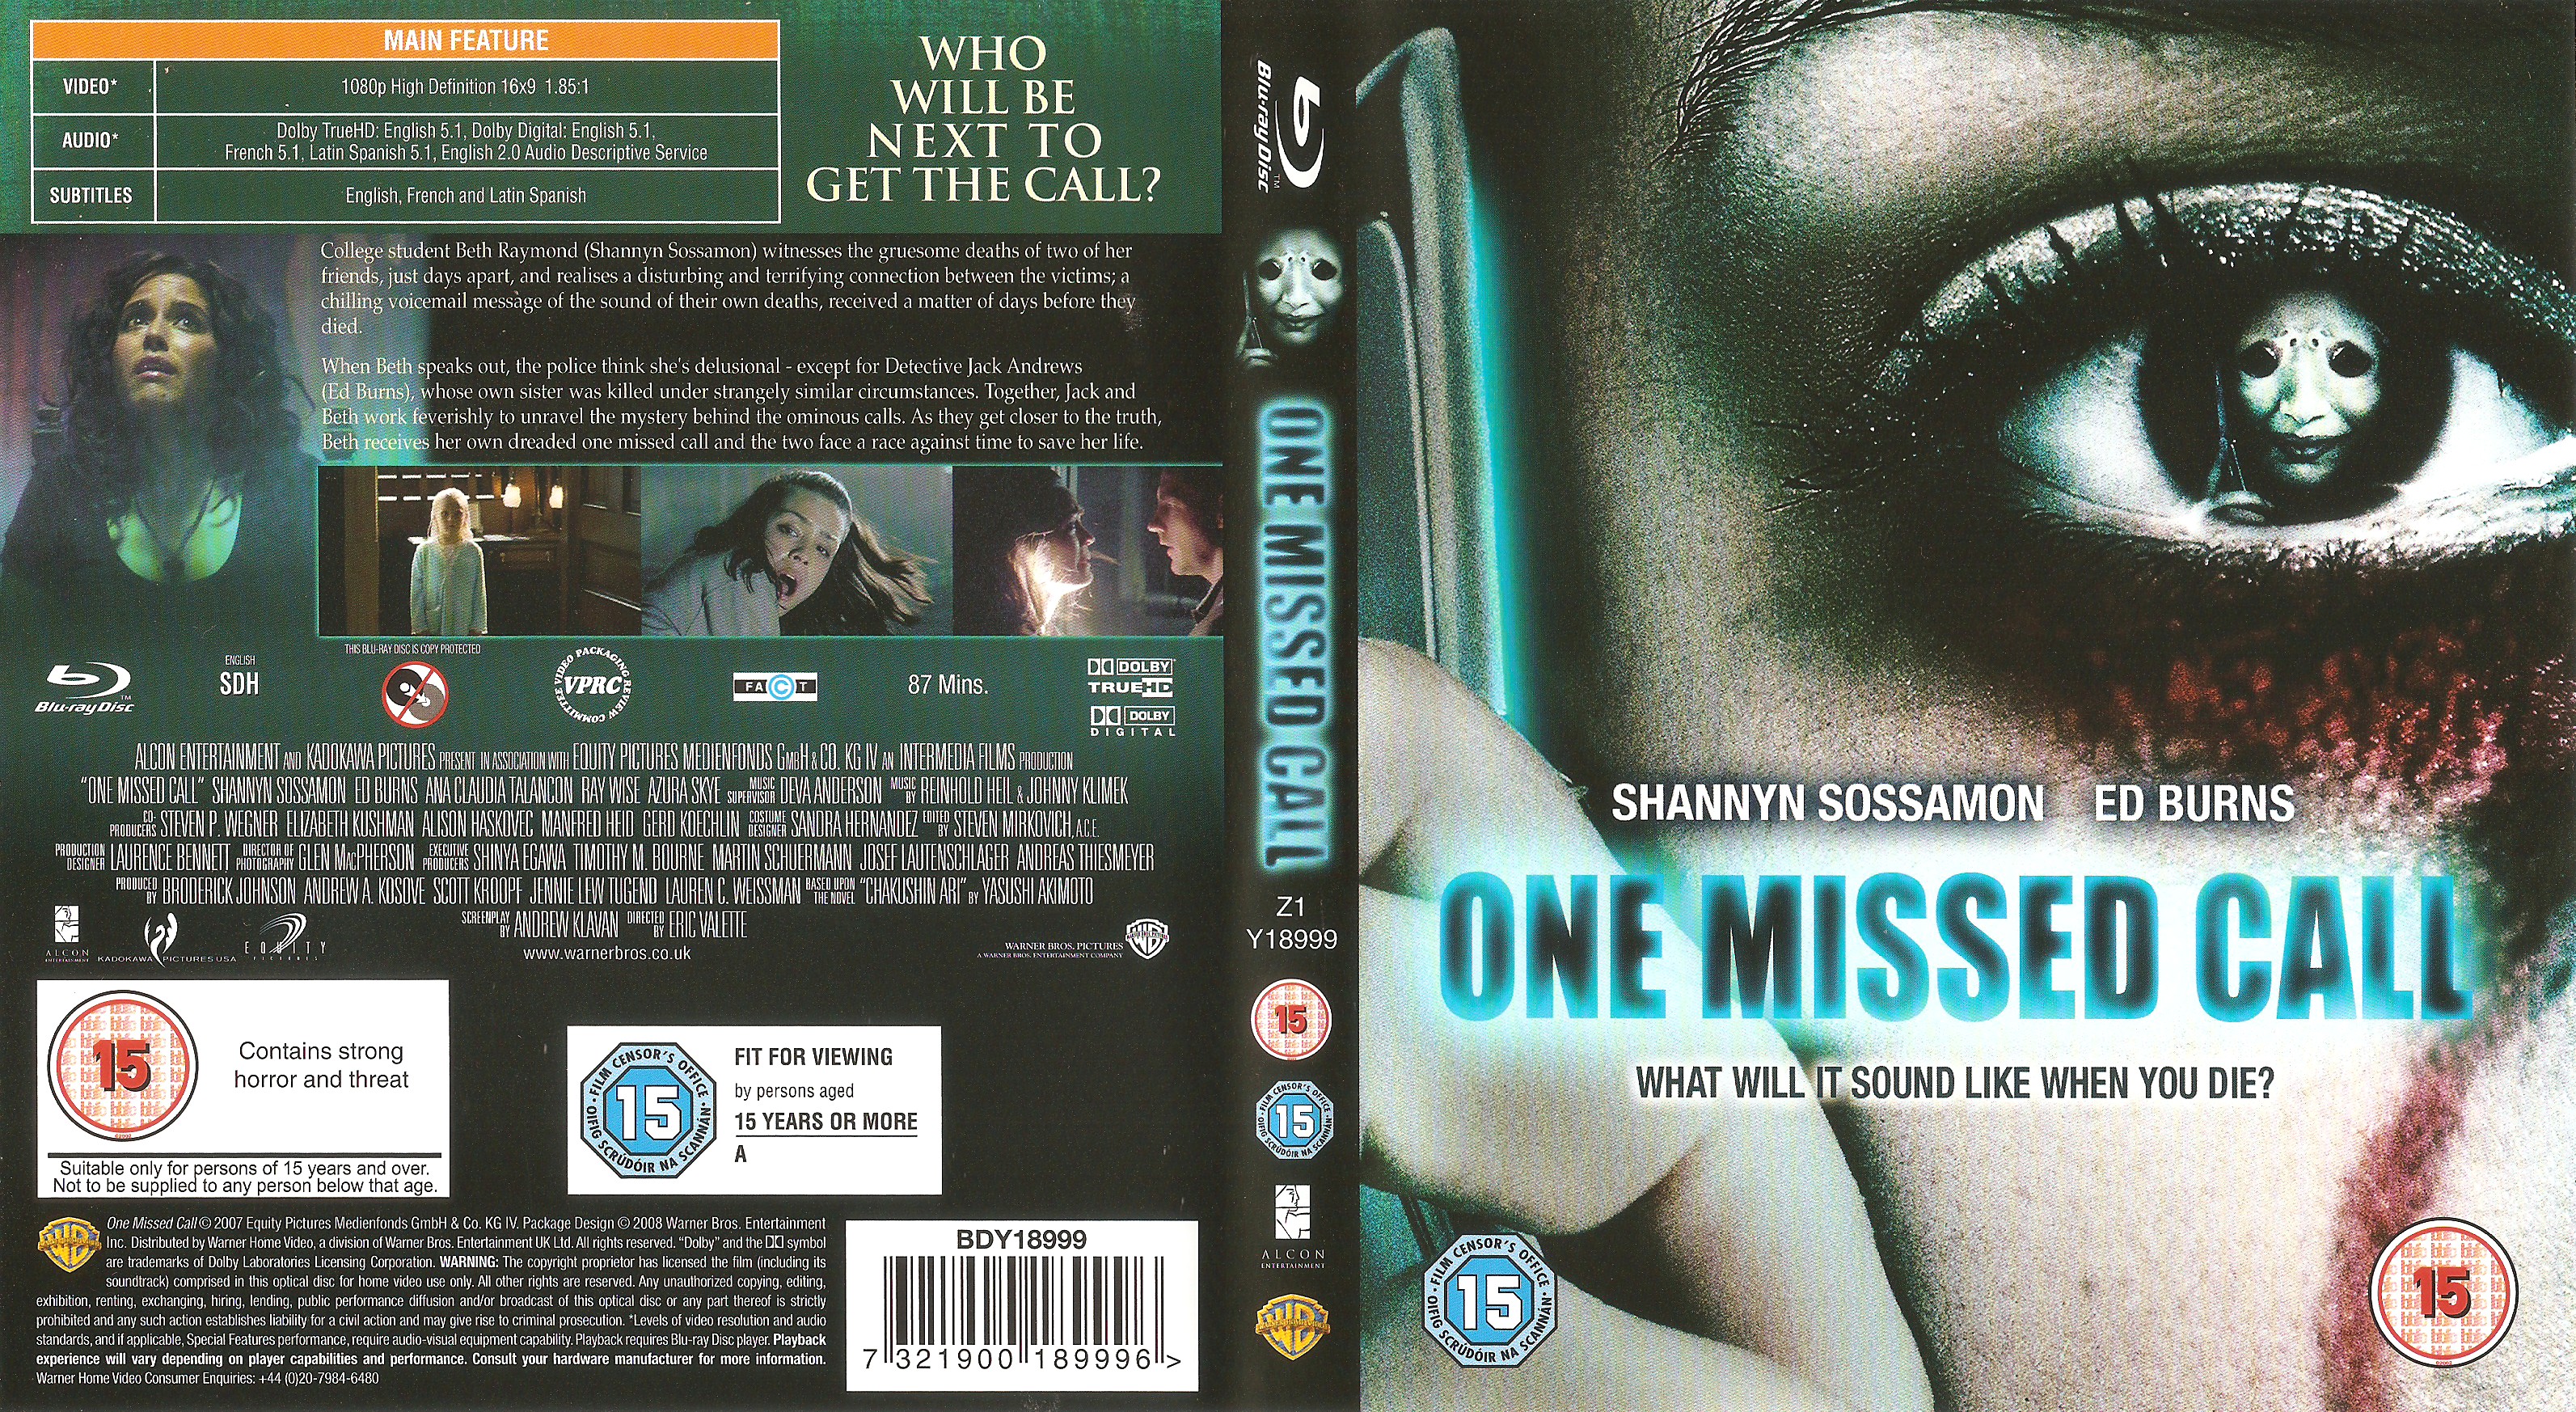 Jaquette DVD One Missed Call (BLU-RAY) v2